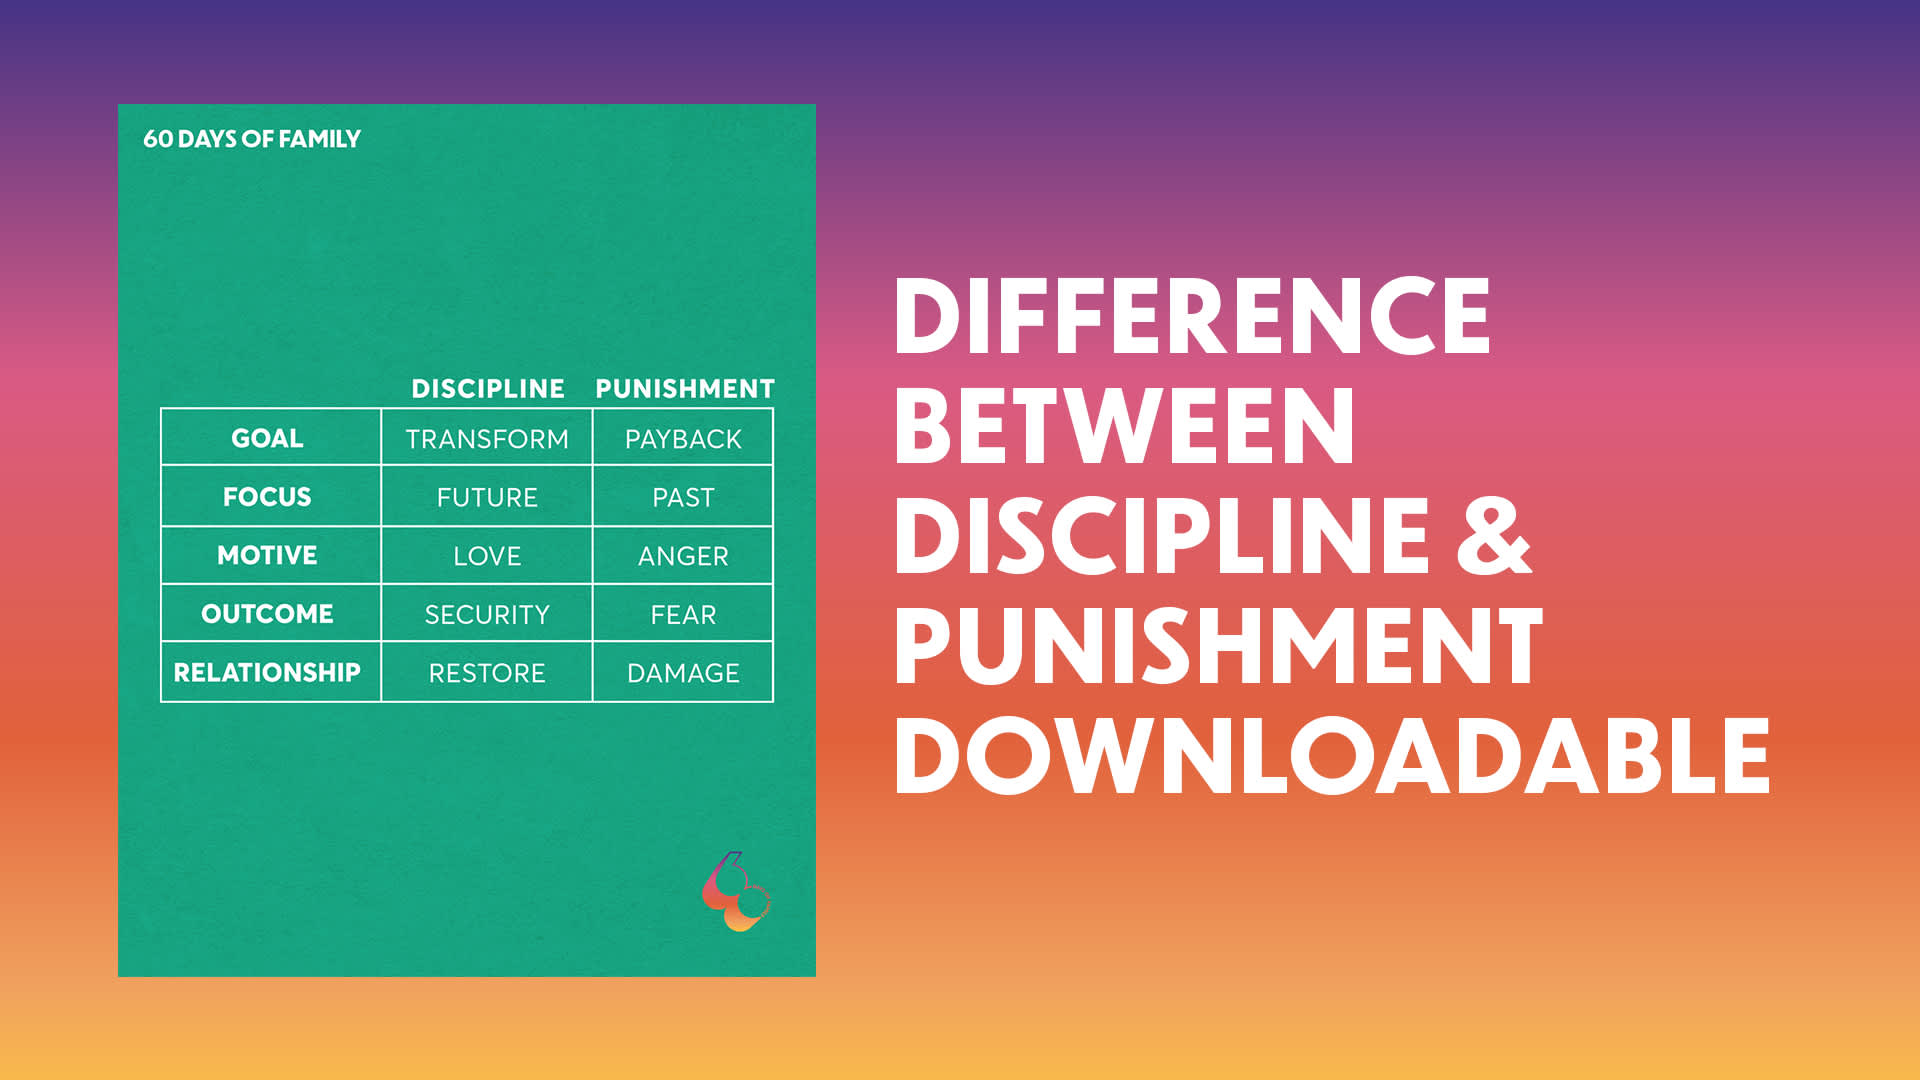 Difference Between Discipline & Punishment Downloadable